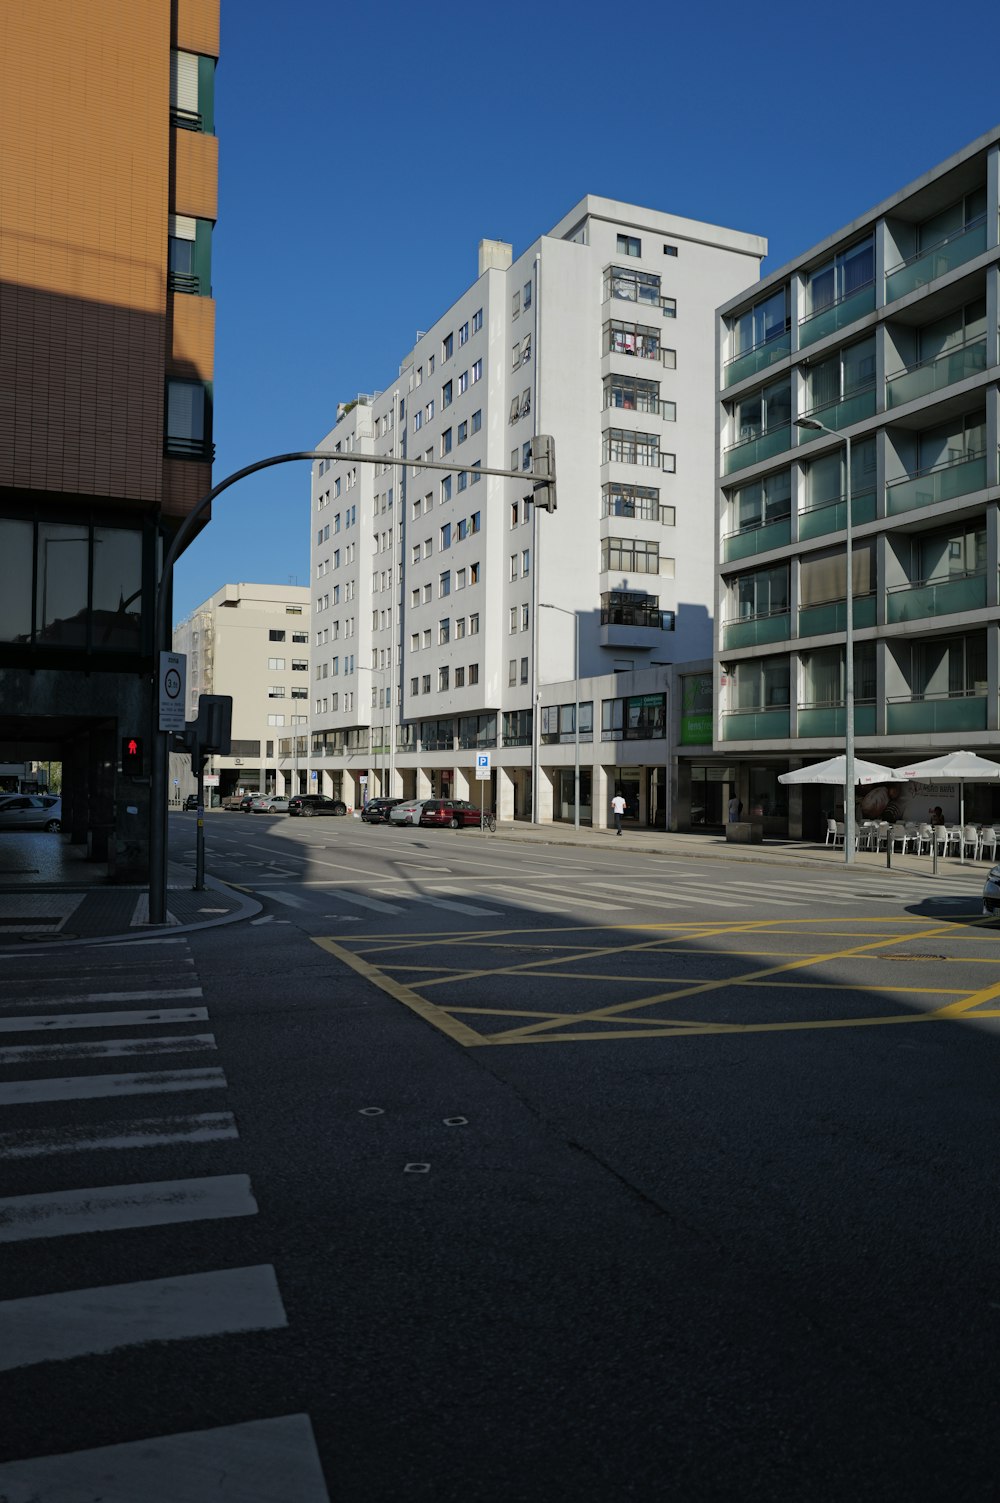 an empty street in a city with tall buildings